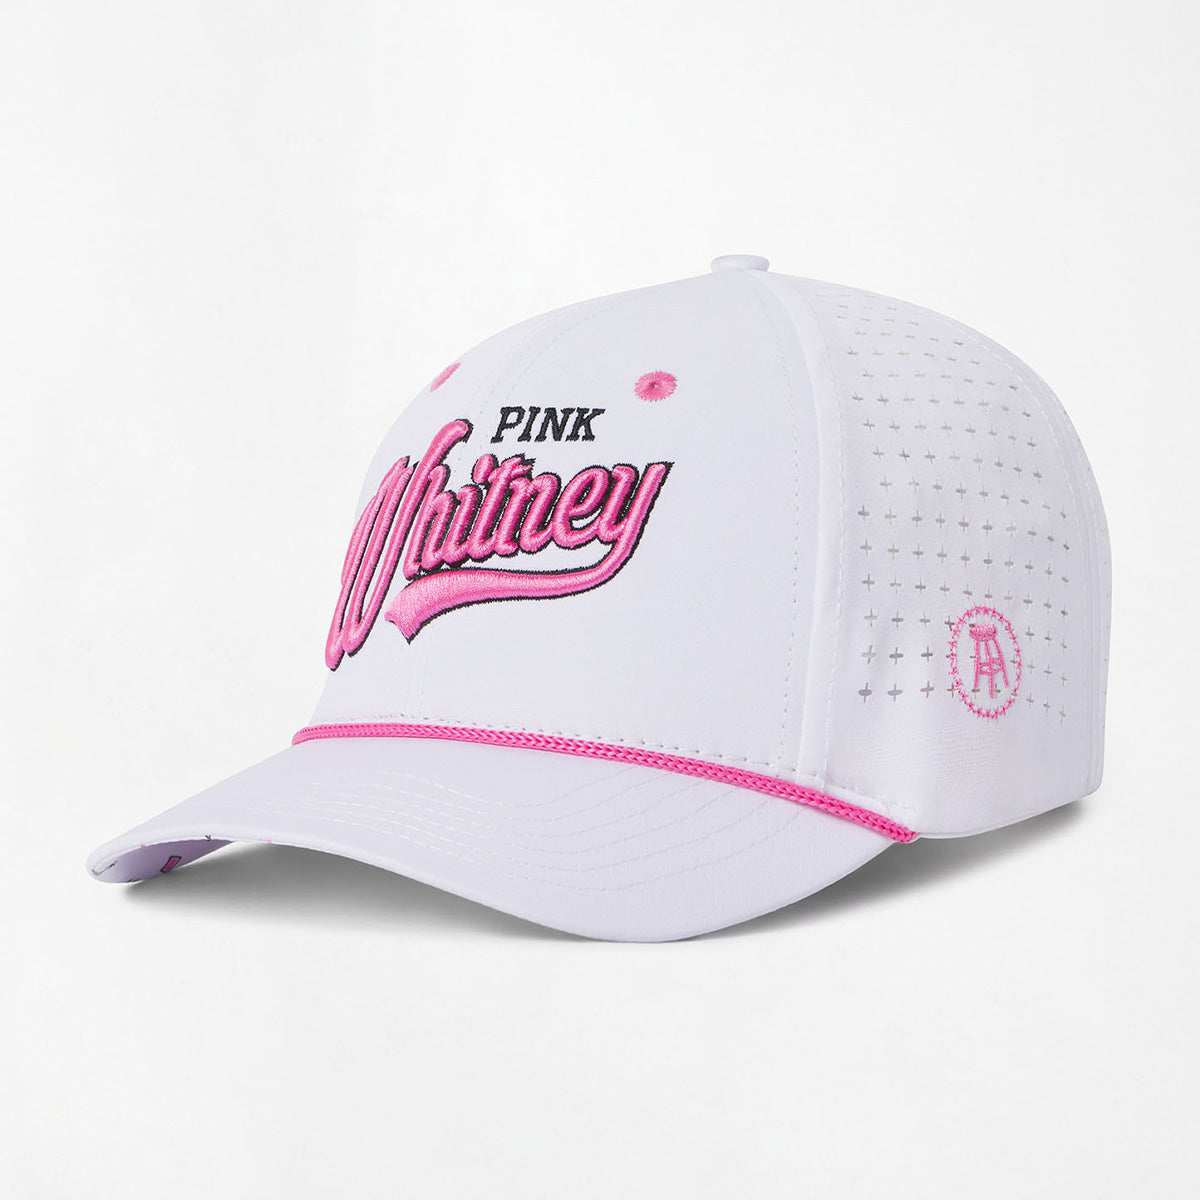 UNRL x Pink Whitney Script Vintage Rope Hat-Hats-Pink Whitney-White-Barstool Sports